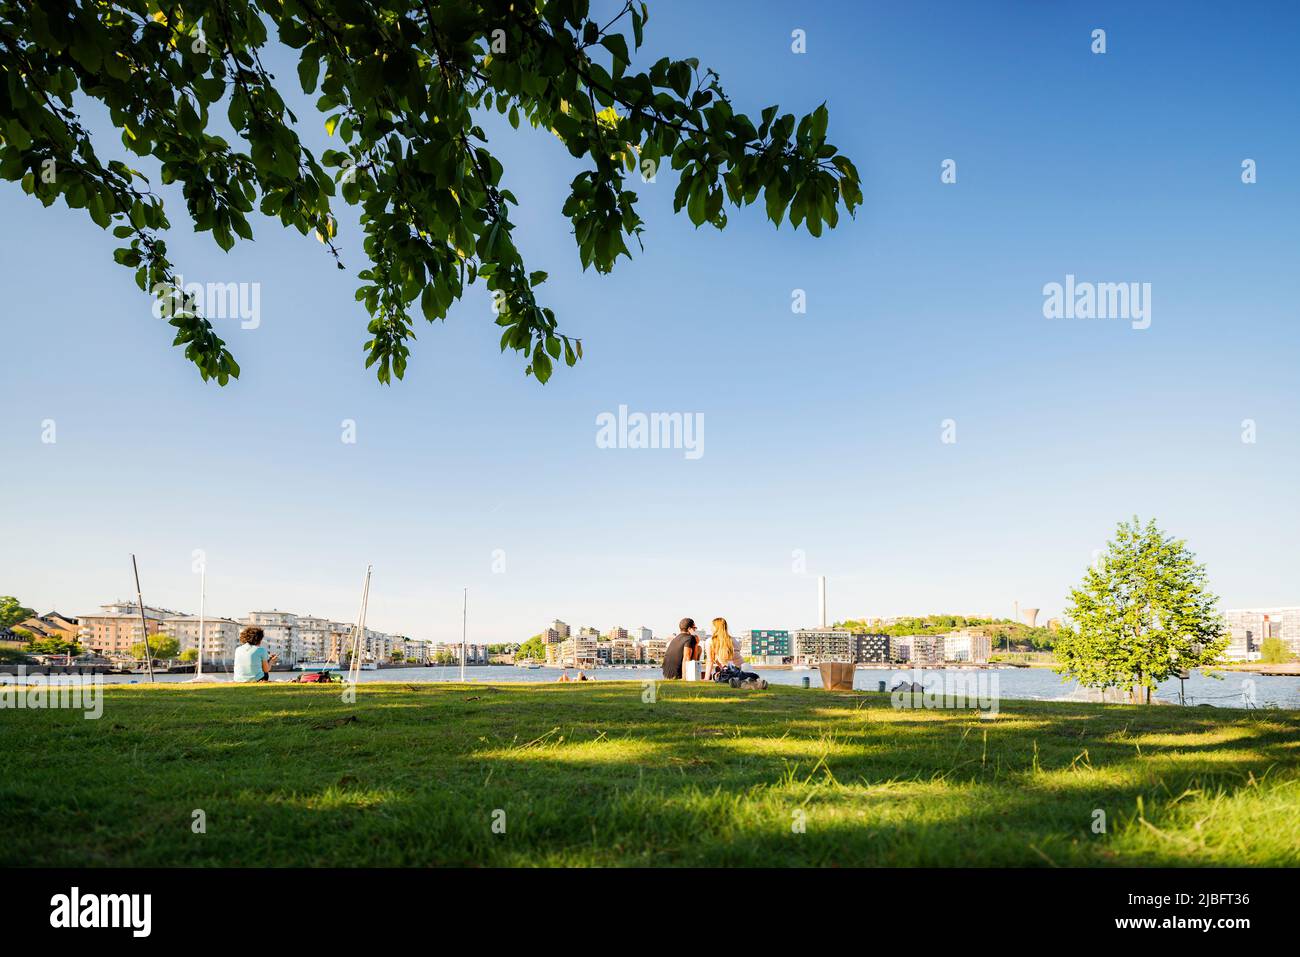 People sitting in grass Stock Photo